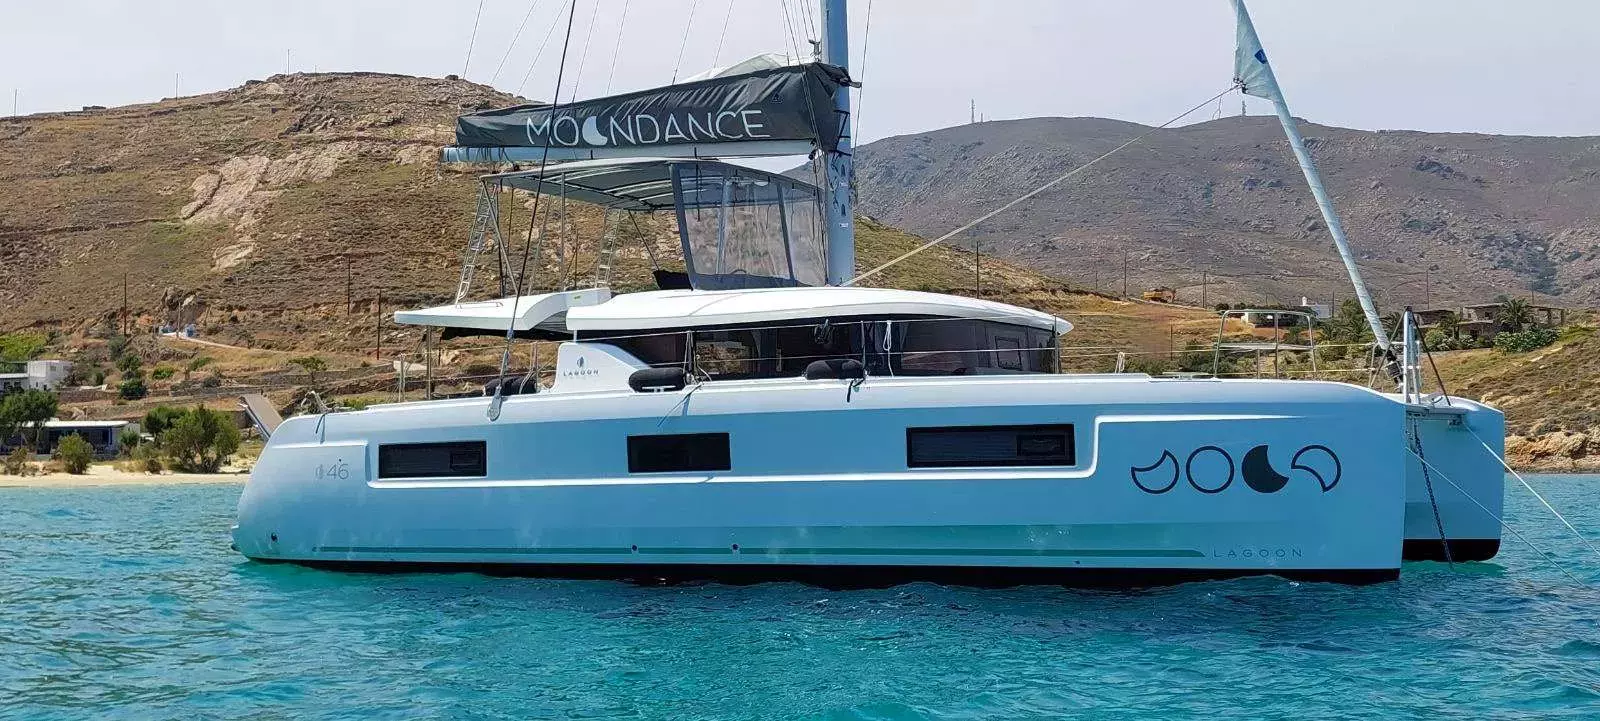 Moondance III by Lagoon - Special Offer for a private Power Catamaran Rental in Mykonos with a crew